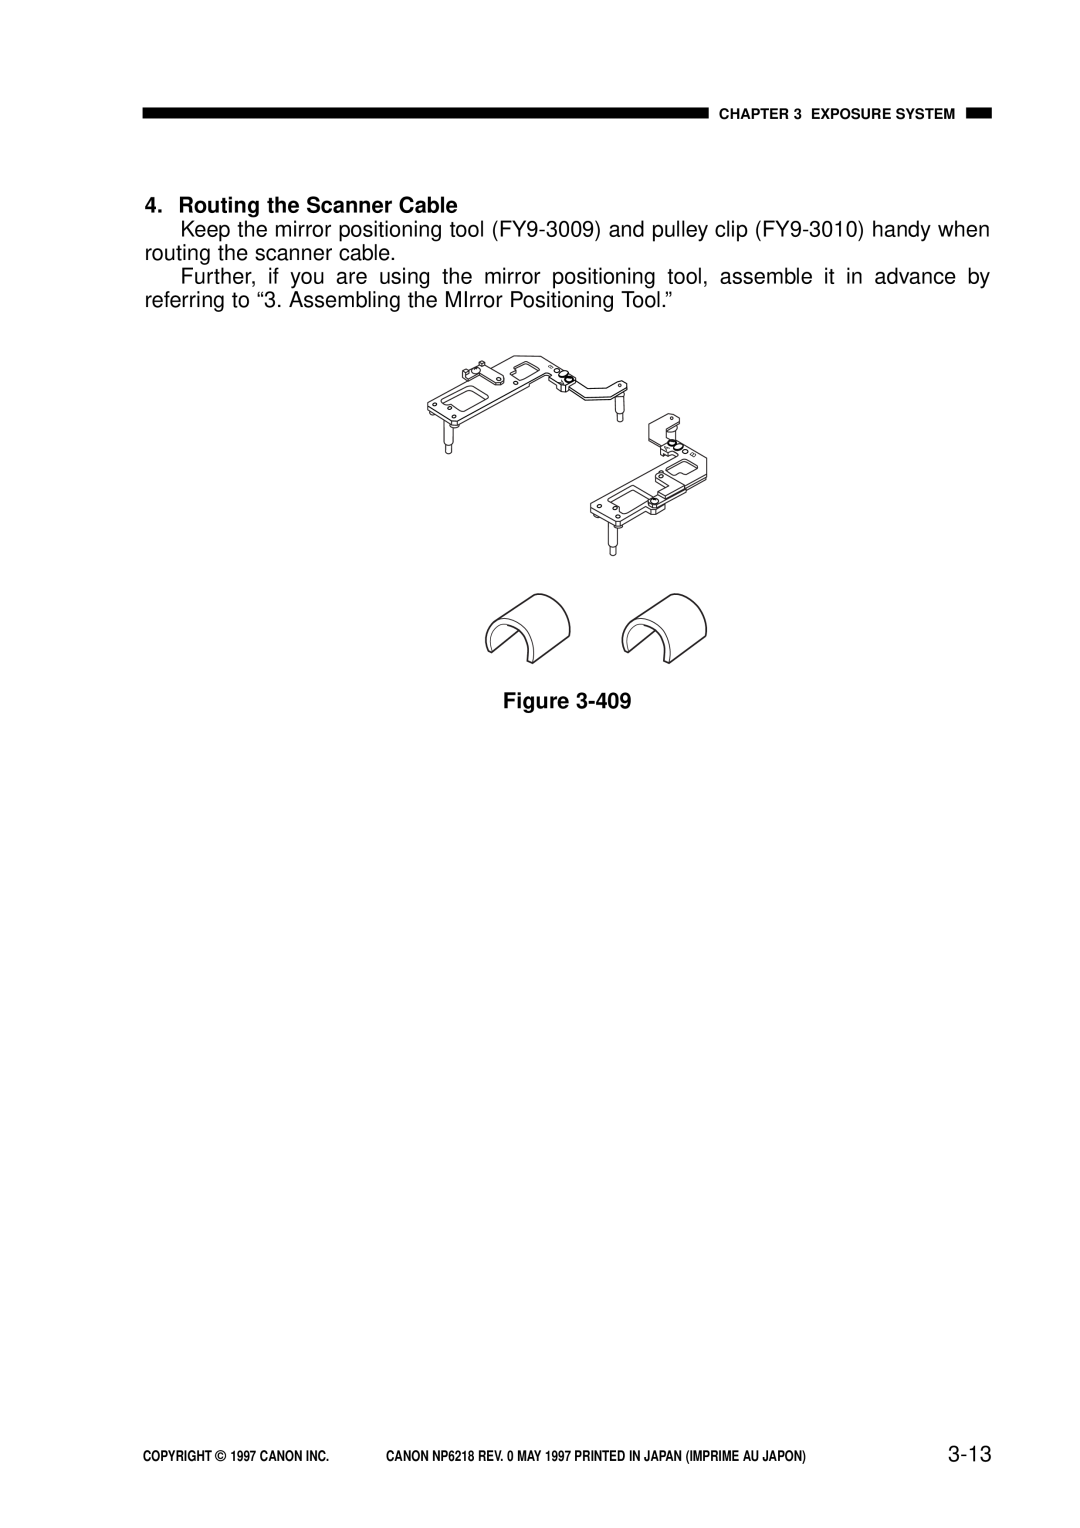 Canon NP6218, FY8-13EX-000 service manual Routing the Scanner Cable, 3-13 